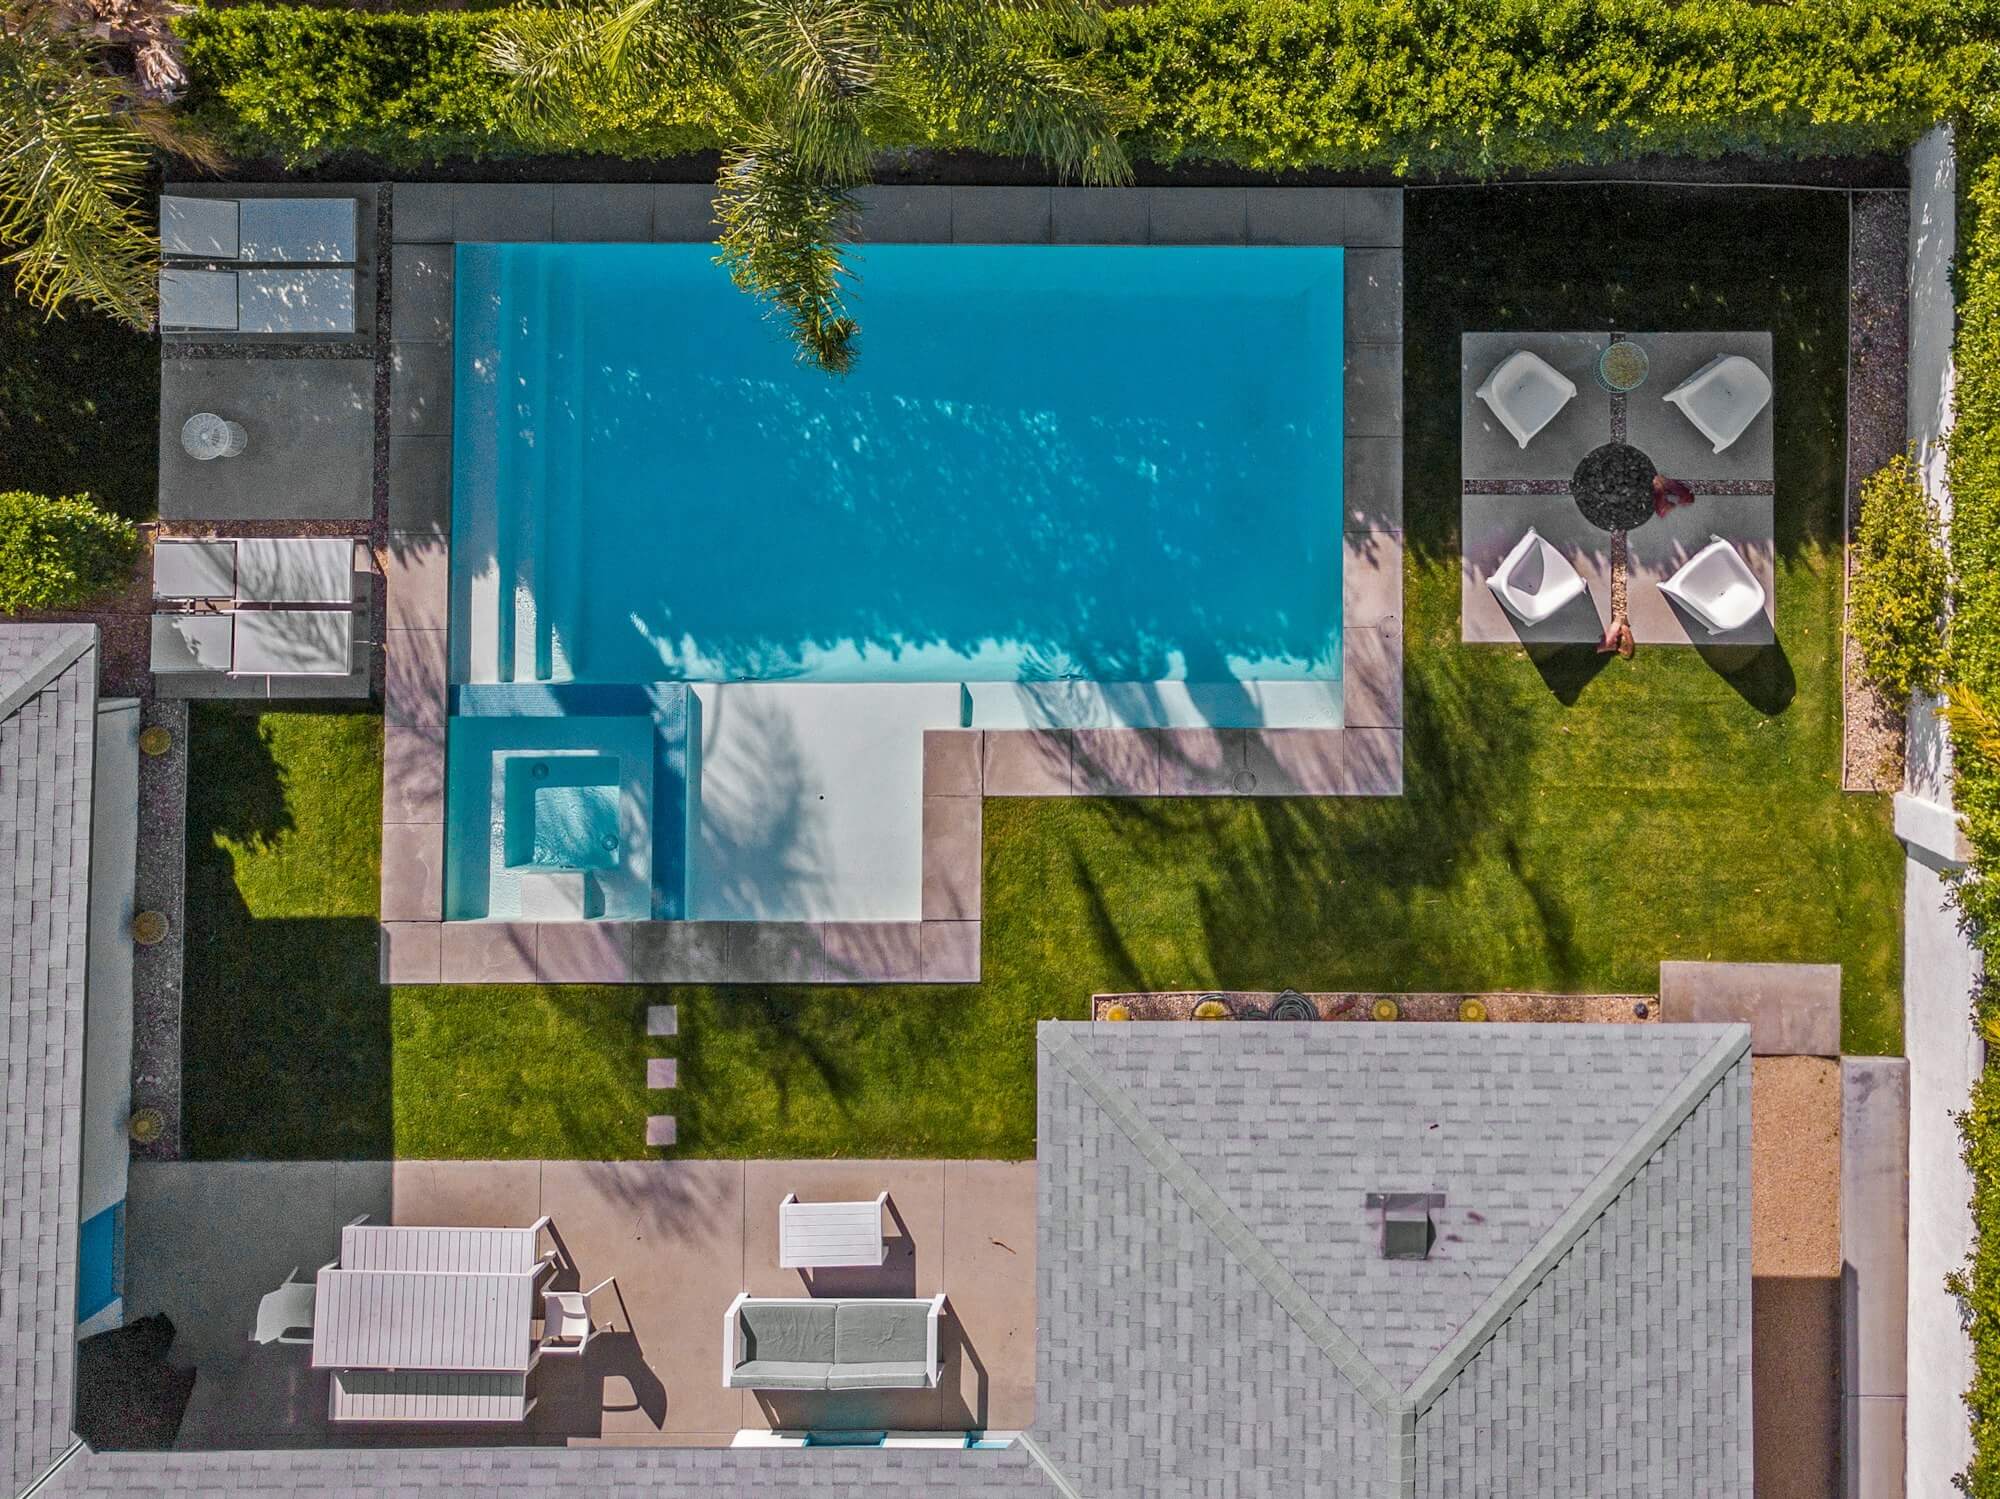 beautiful drone photo of pool in backyard - Blueprint for Online Growth: Innovative Digital Marketing Strategies for Contractors